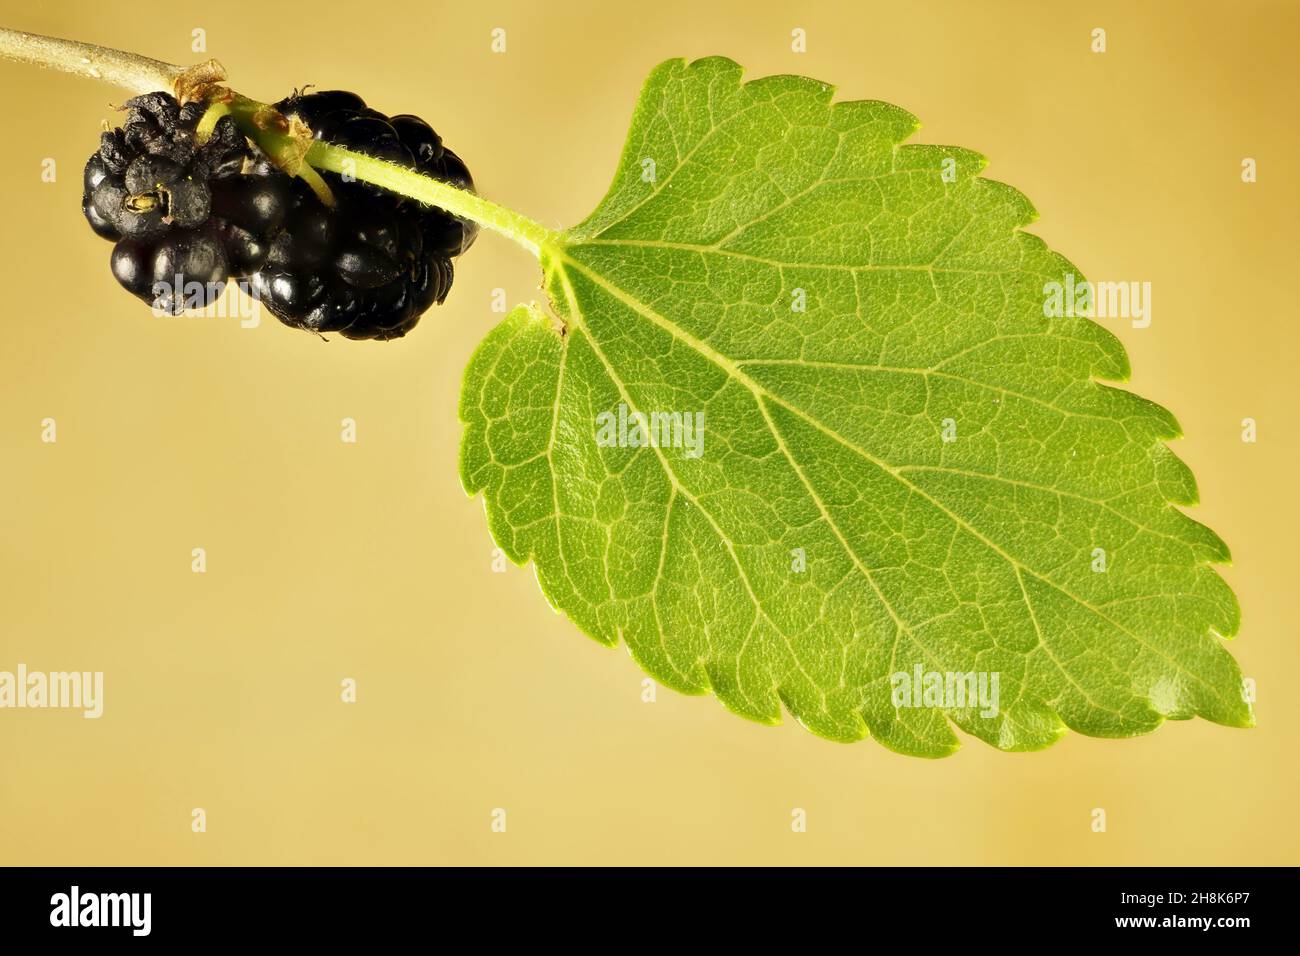 Super macro view of isolated, ripe Mulberry (Morus alba) aggregate and leaf on stem Stock Photo